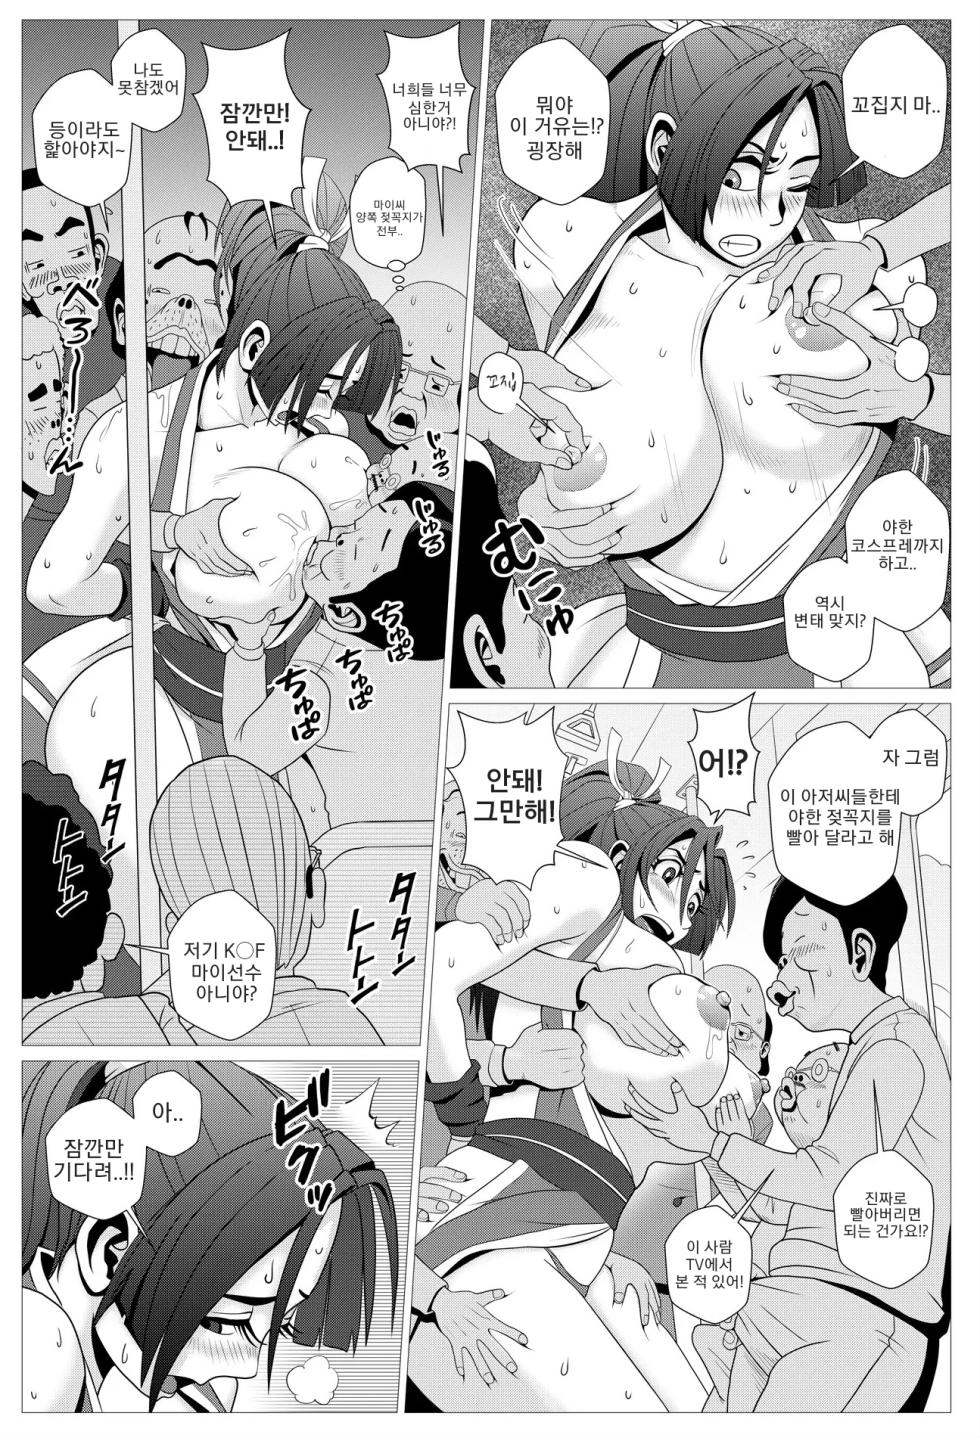 [Falcon115 (Forester)] Maidono no San (The King of Fighters) [Korean] - Page 13